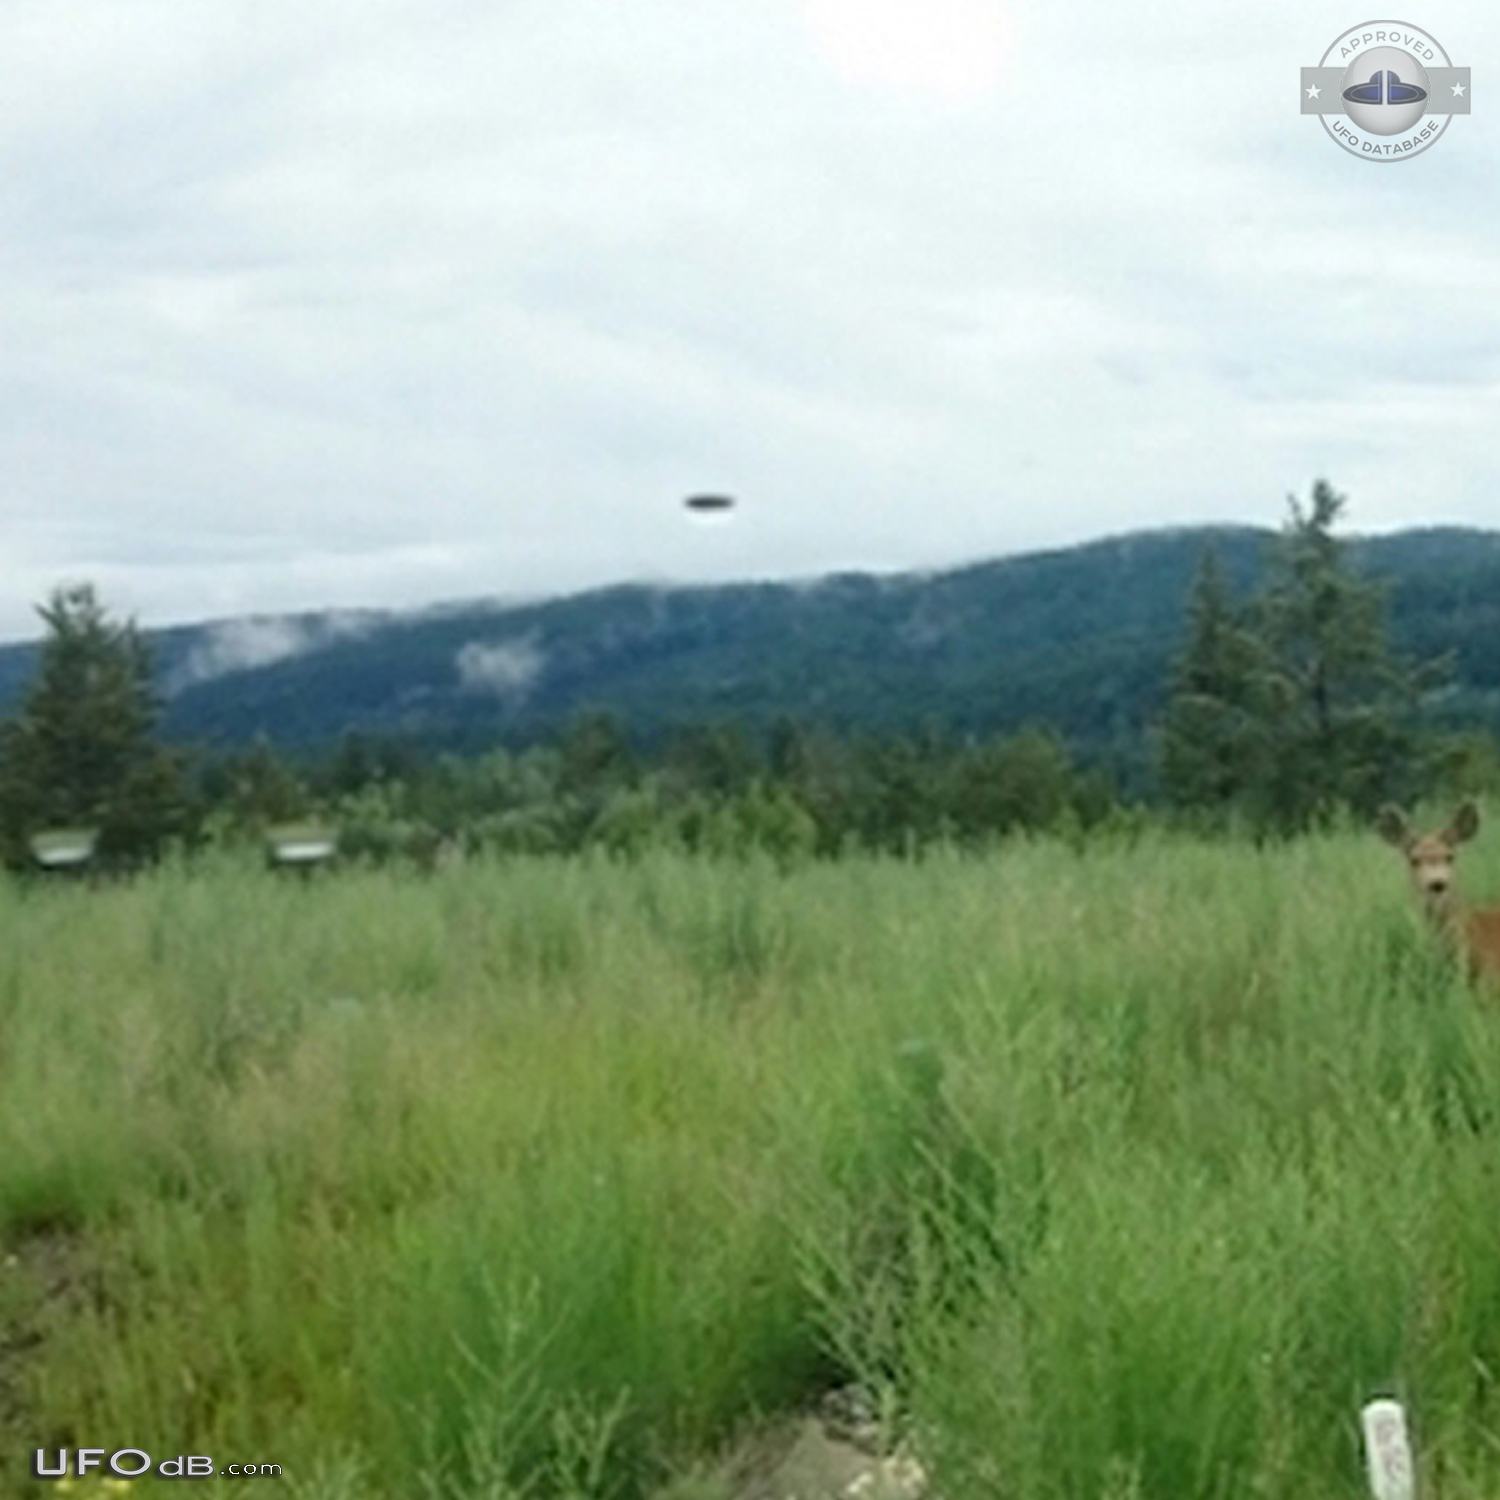 Deer picture gets a UFO passing by near Logan Lake British Columbia Ca UFO Picture #844-3